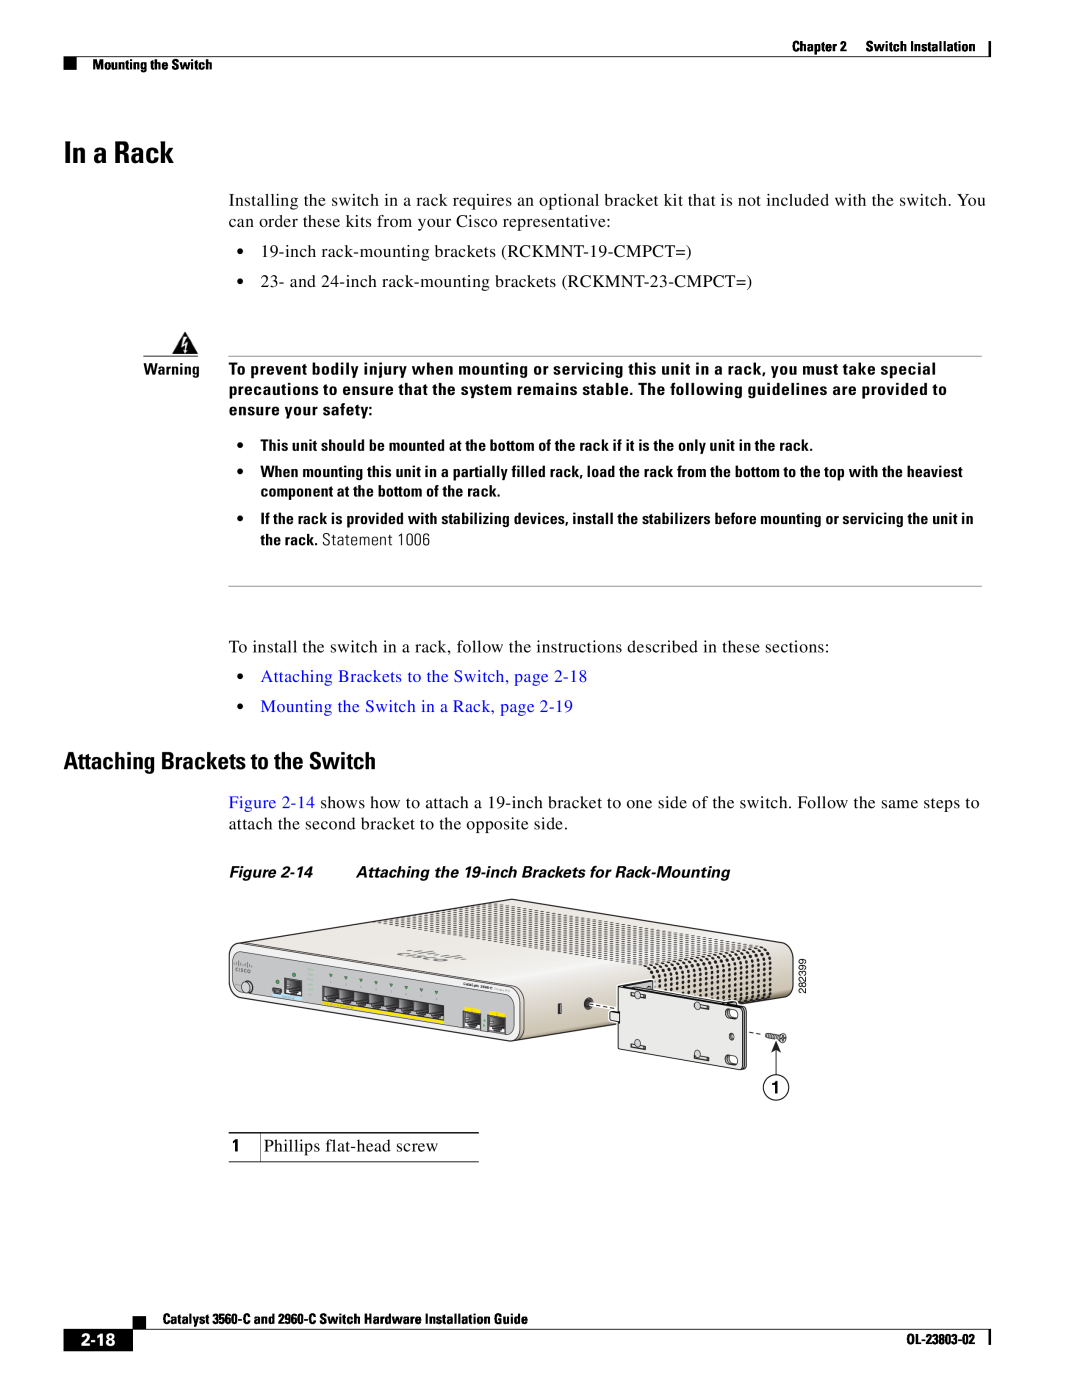 Cisco Systems 3560-C In a Rack, Attaching Brackets to the Switch, page, Mounting the Switch in a Rack, page, 2-18 